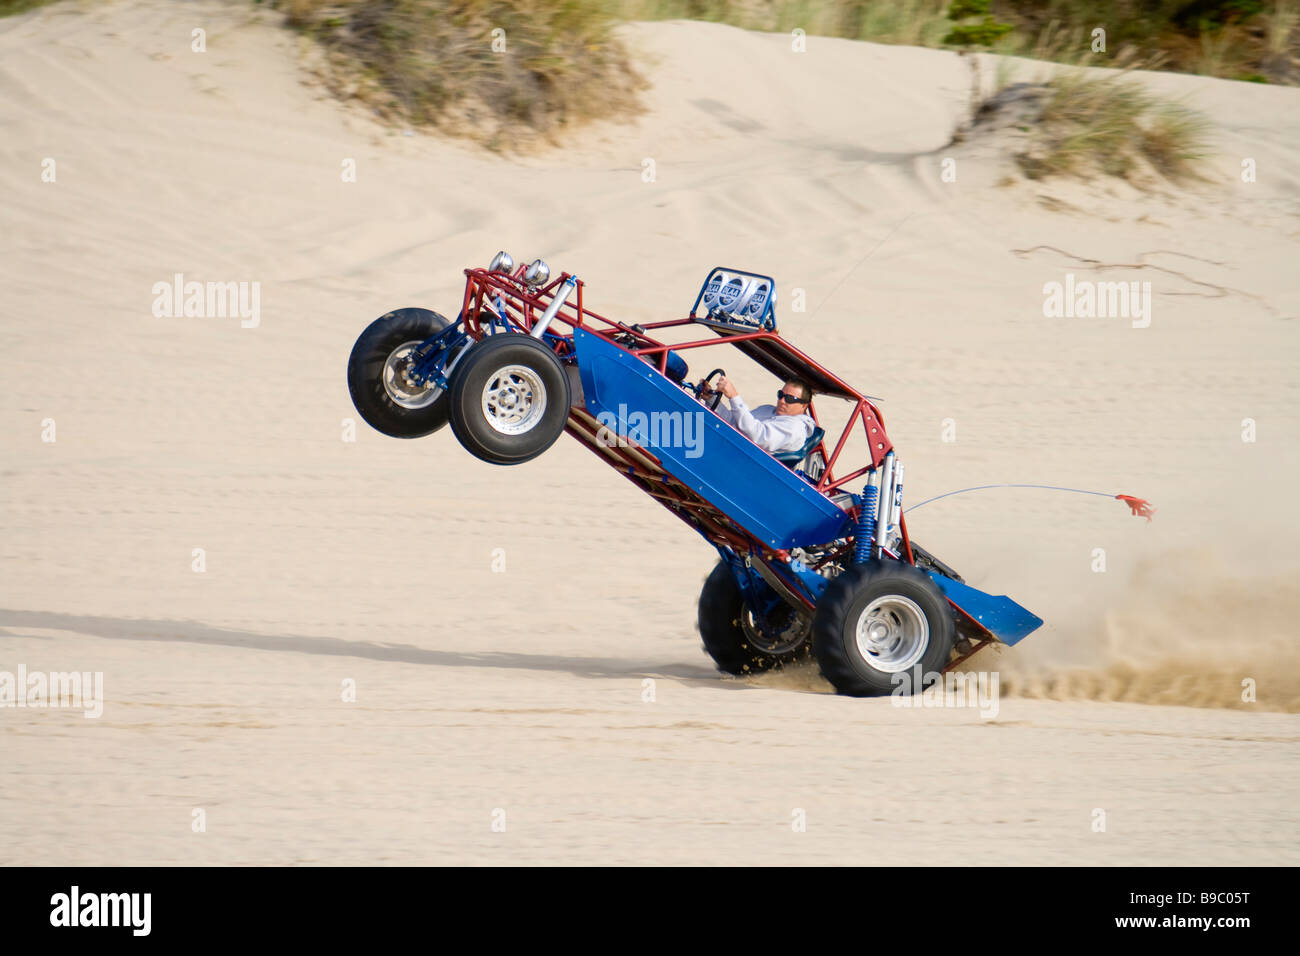 side by side buggy racing